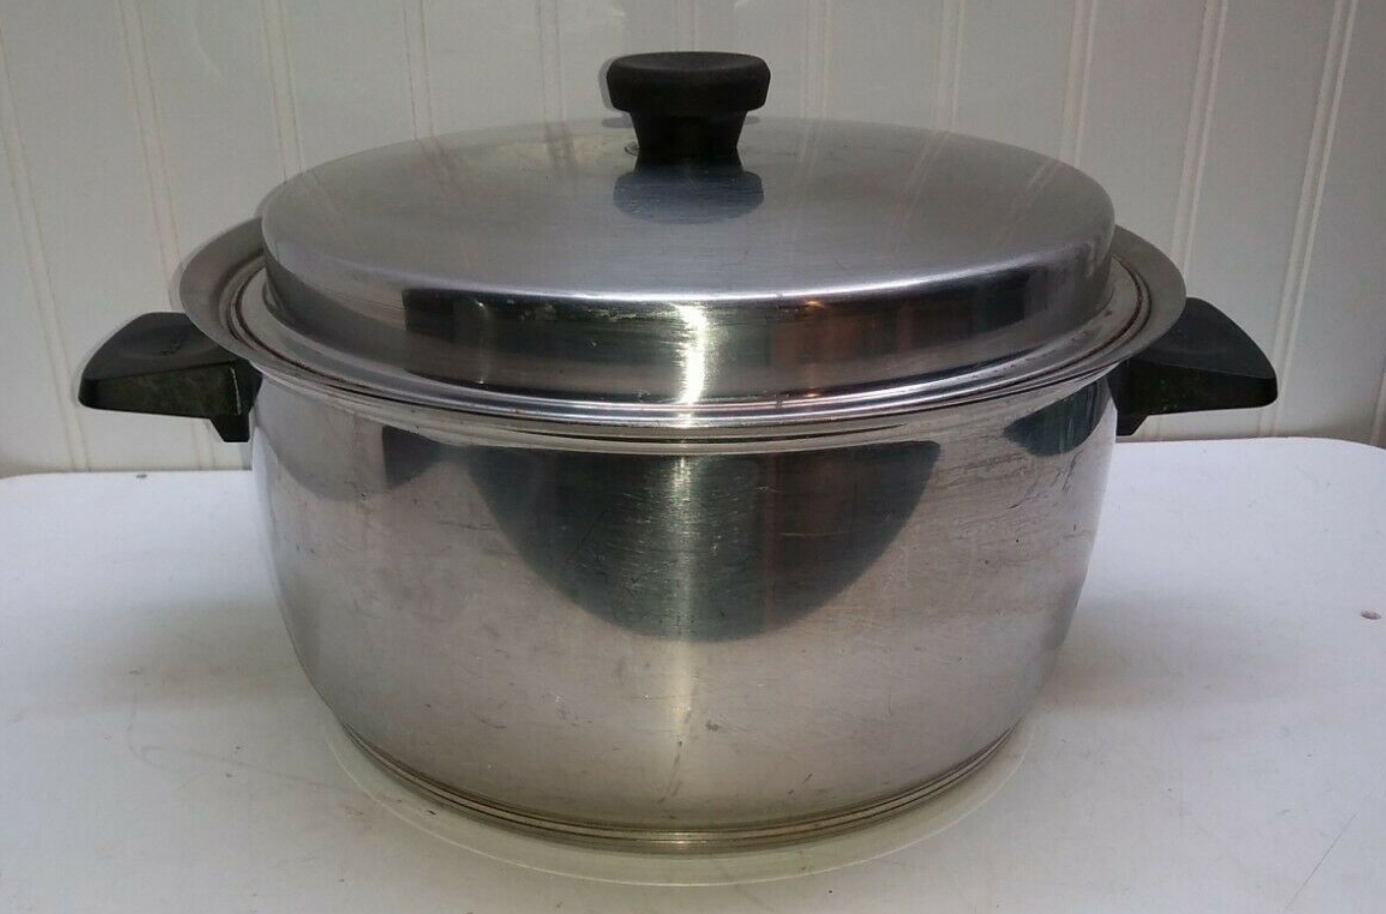 Rena Ware cookware. My mother always had this but she still has it